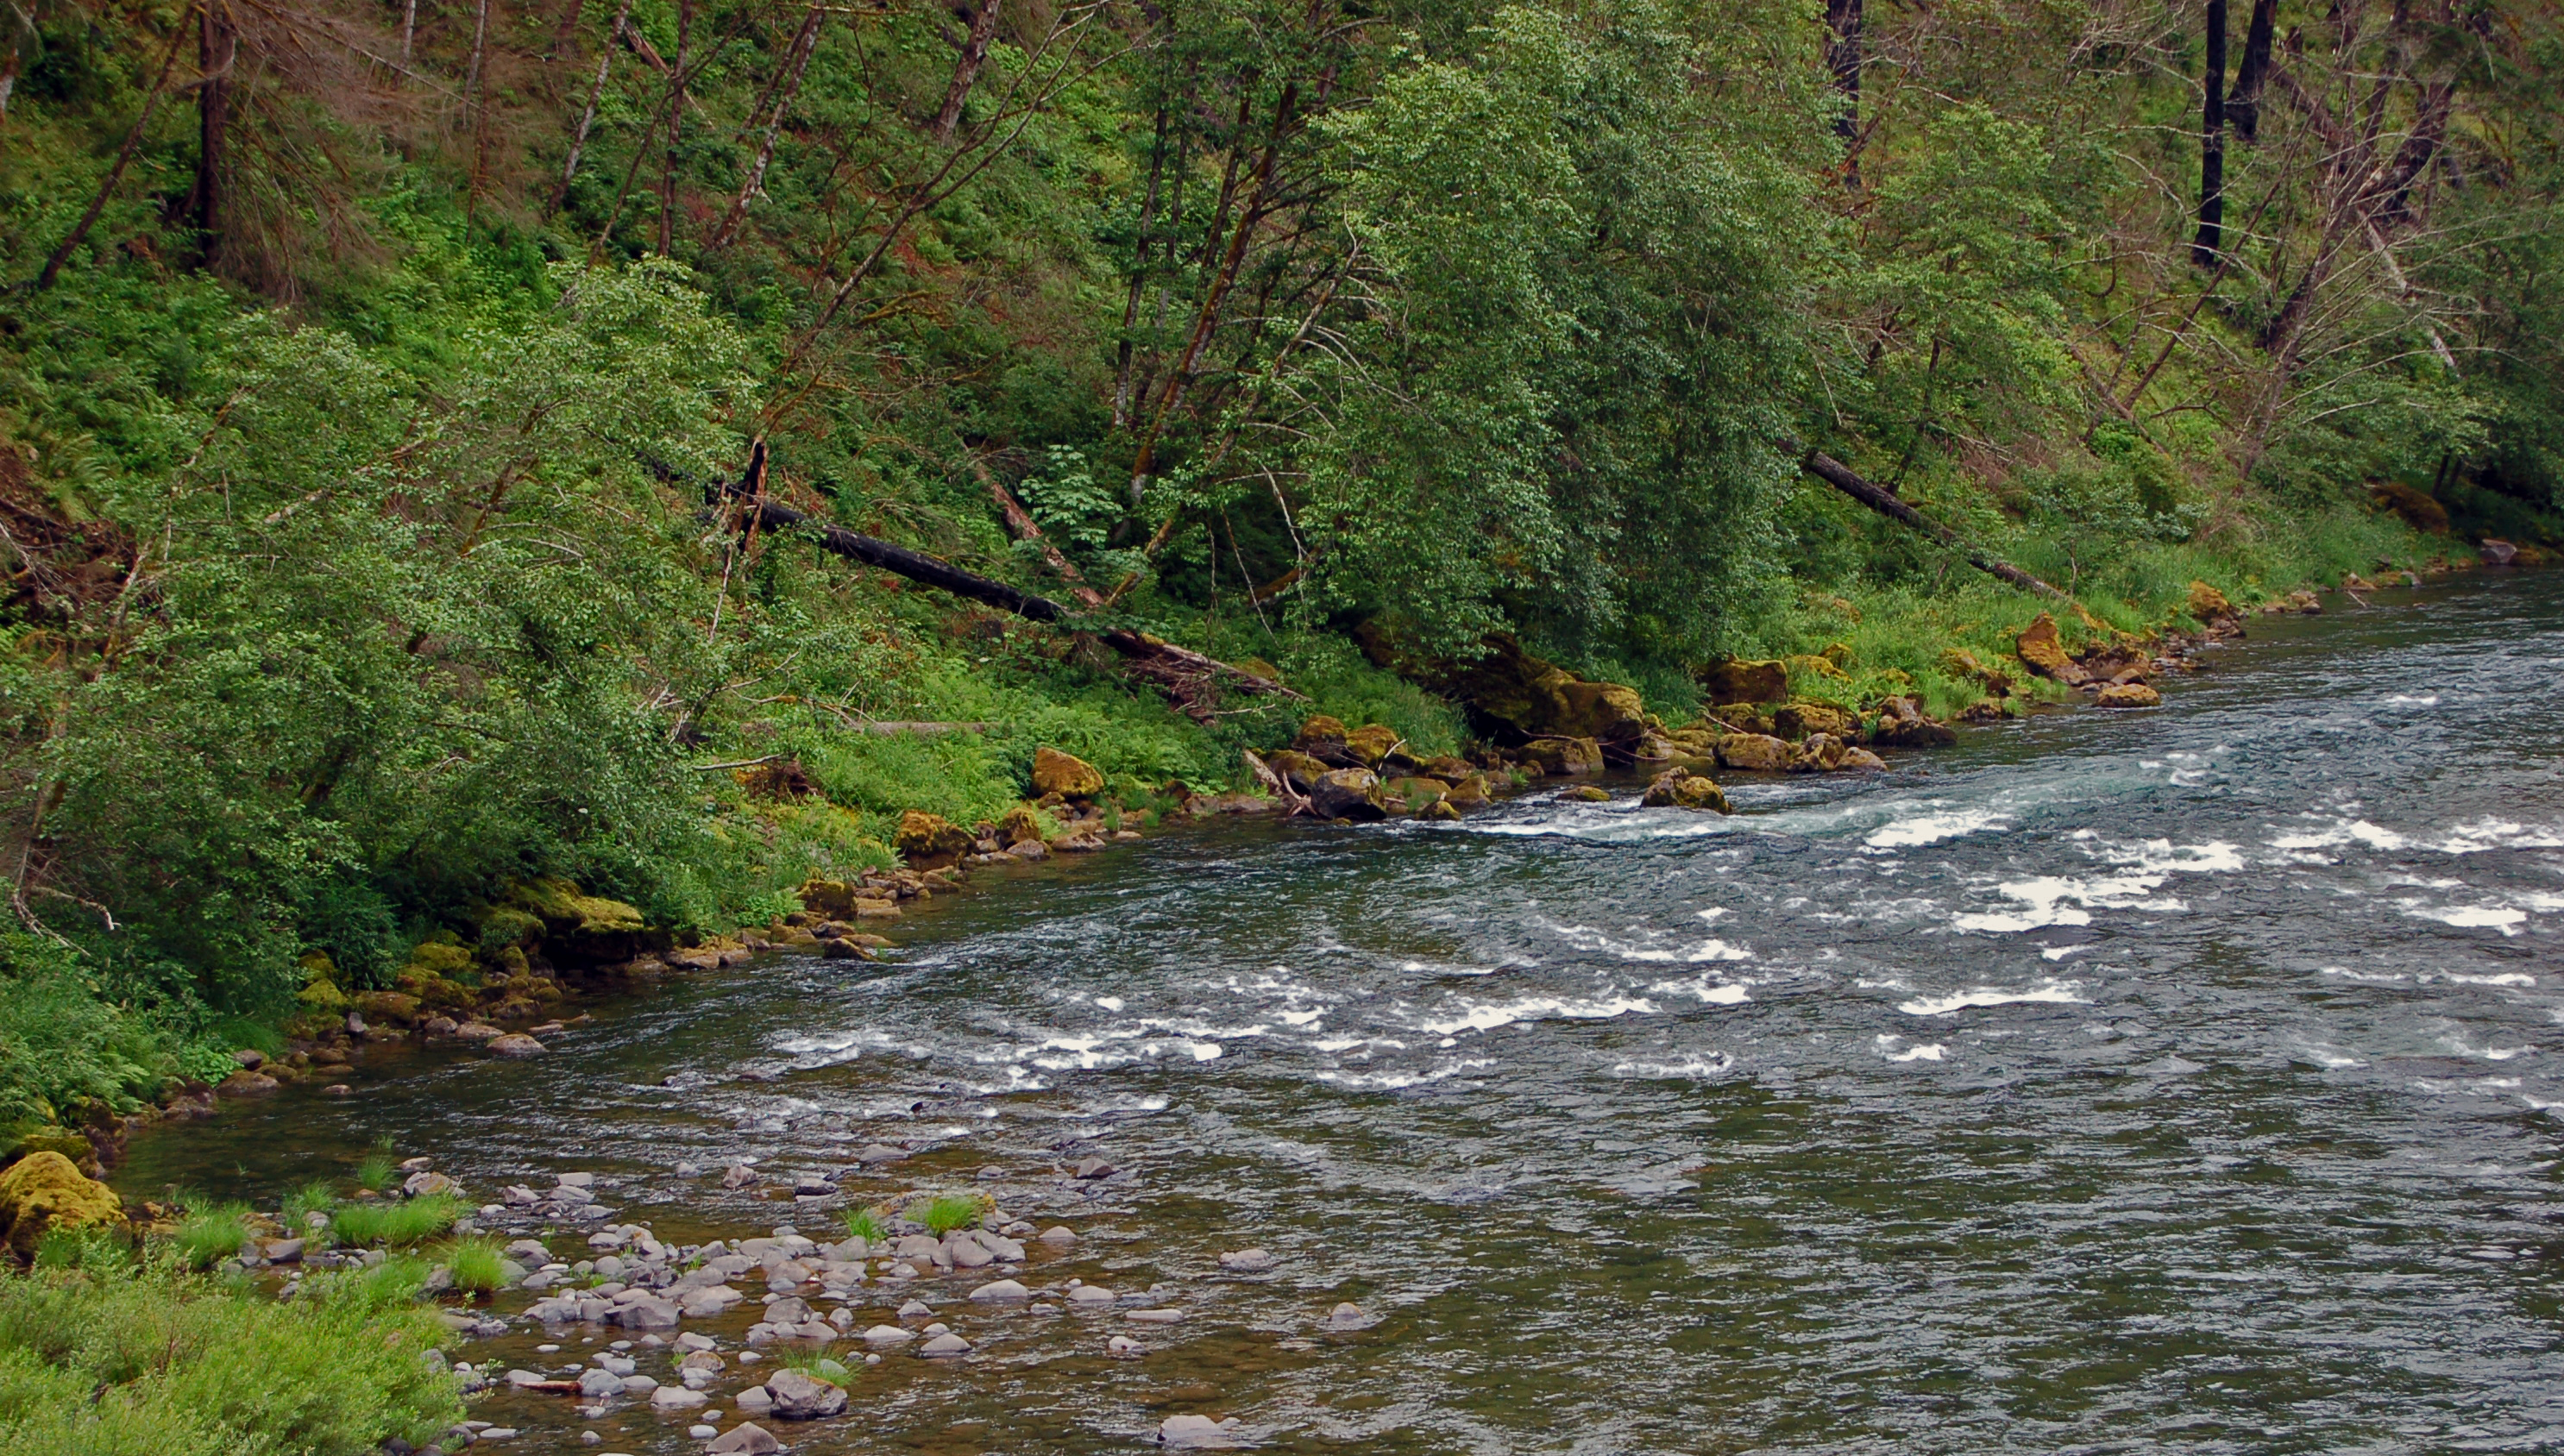 A view of the Clackamas River in Oregon